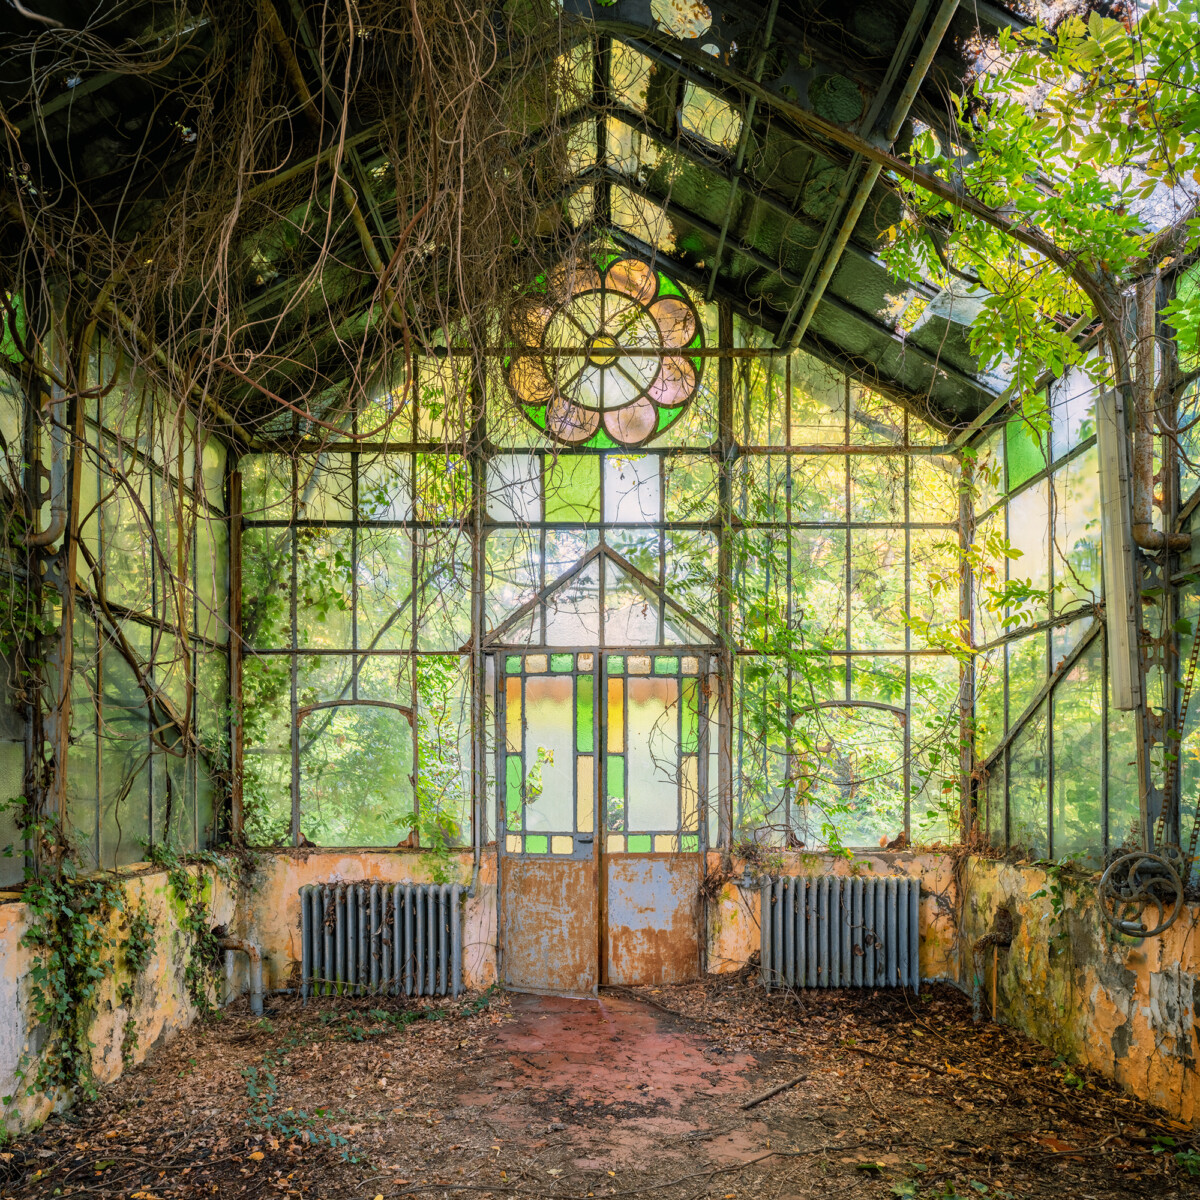 Abandoned greenhouse in Italy photographed by Gina Soden